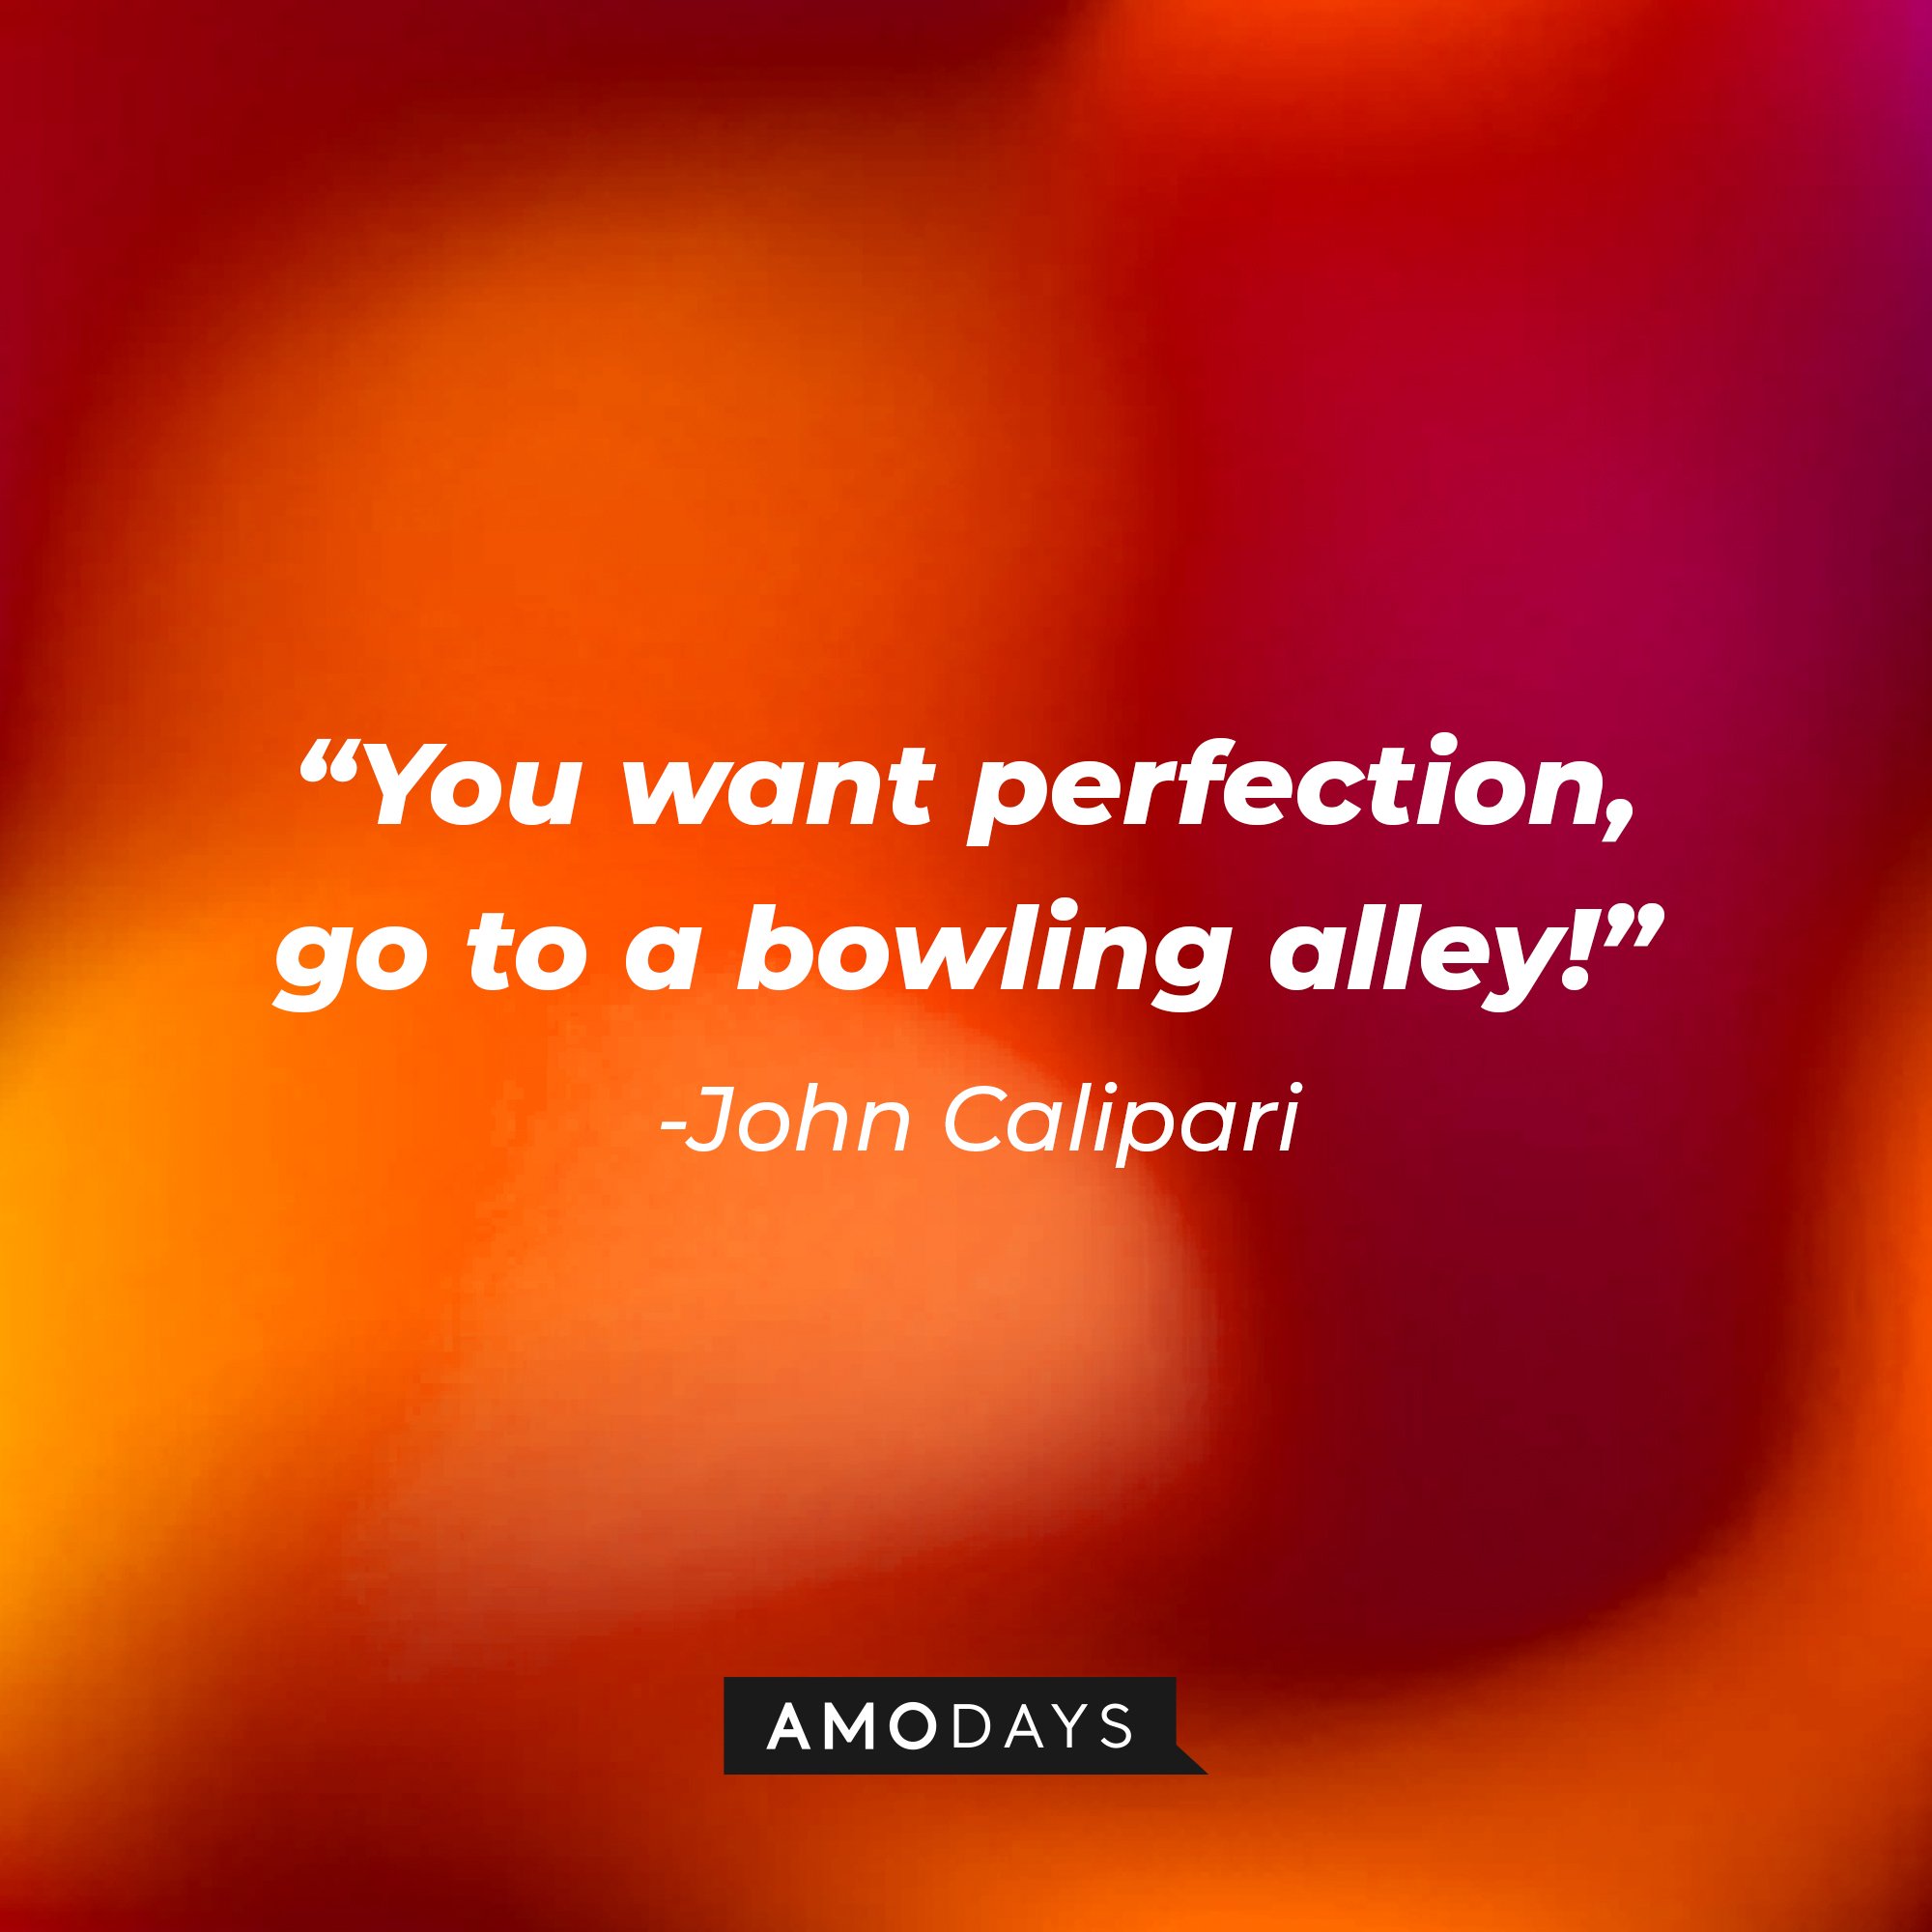 John Calipari's quote: "You want perfection, go to a bowling alley!" | Image: AmoDays